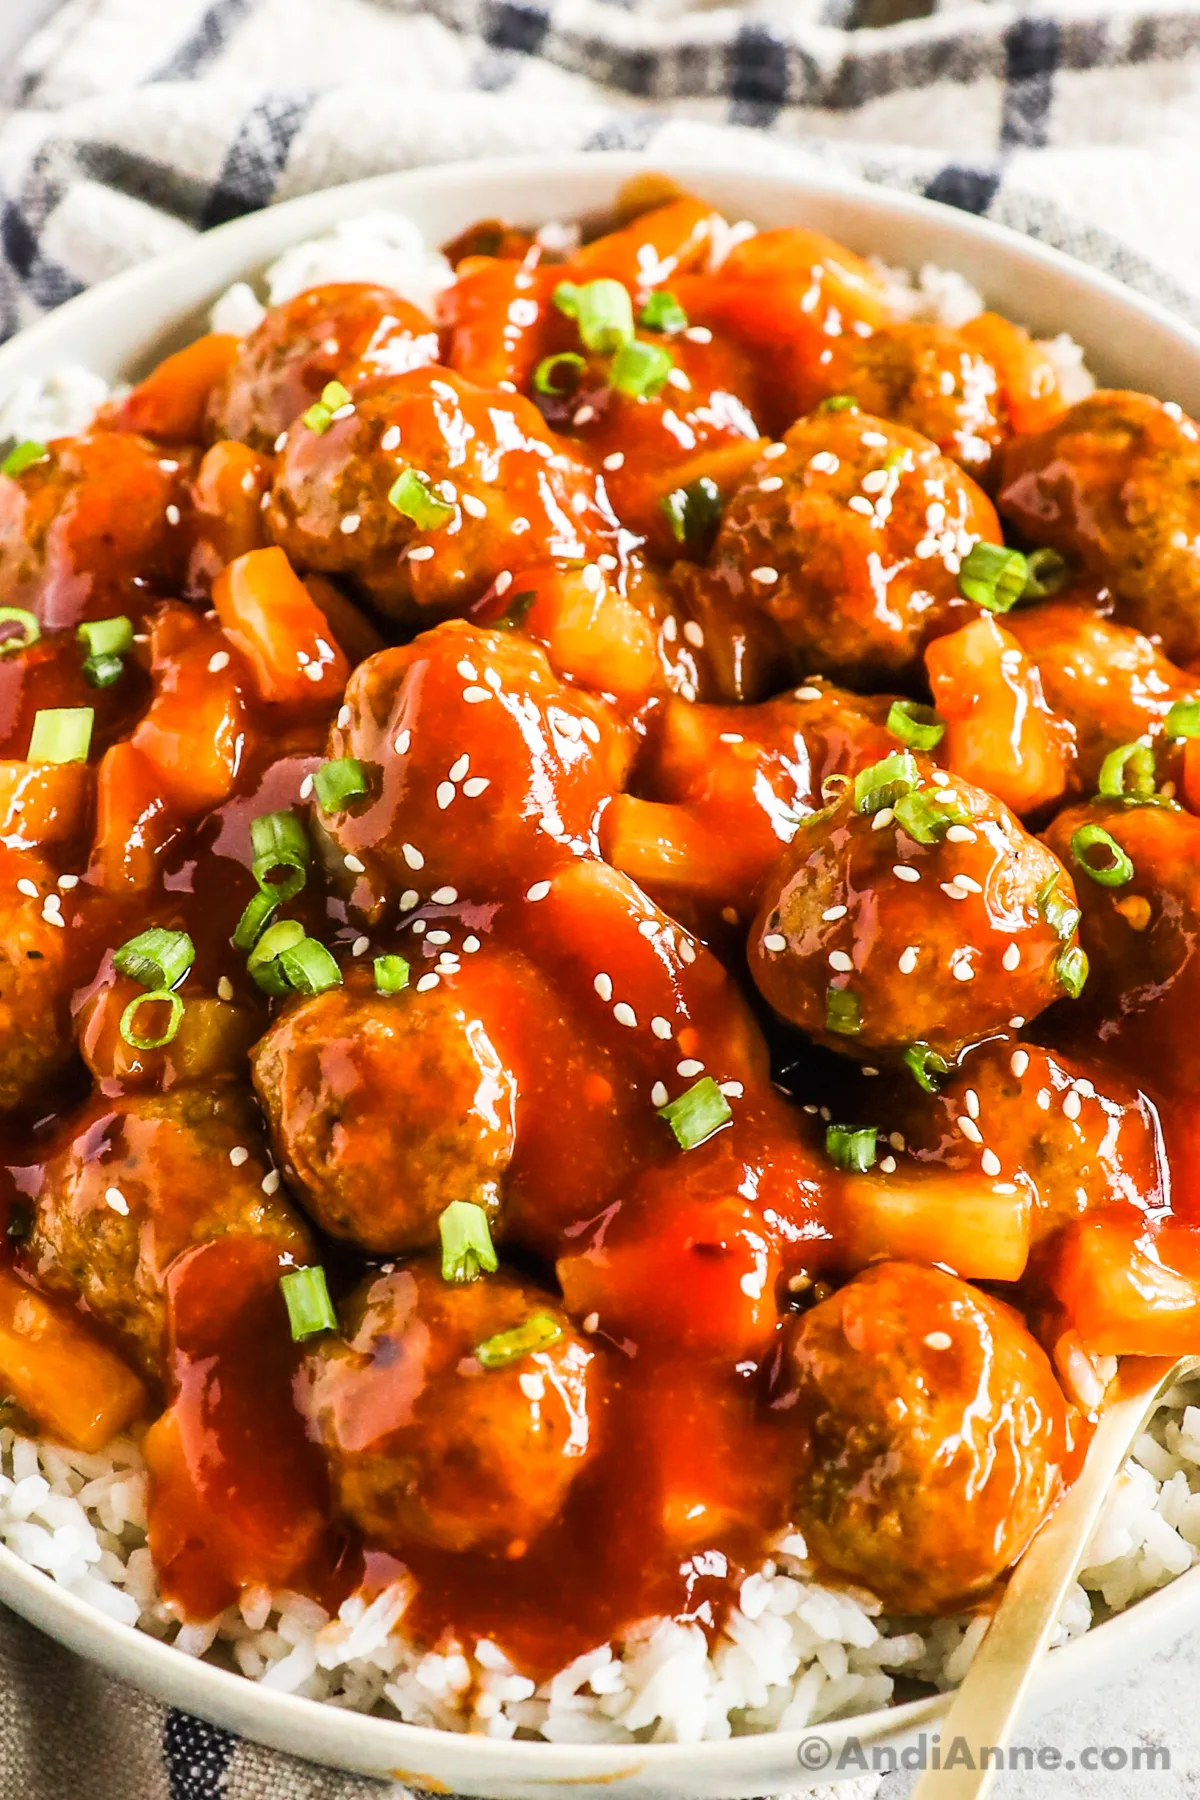 A plate of sweet and sour meatballs over rice.